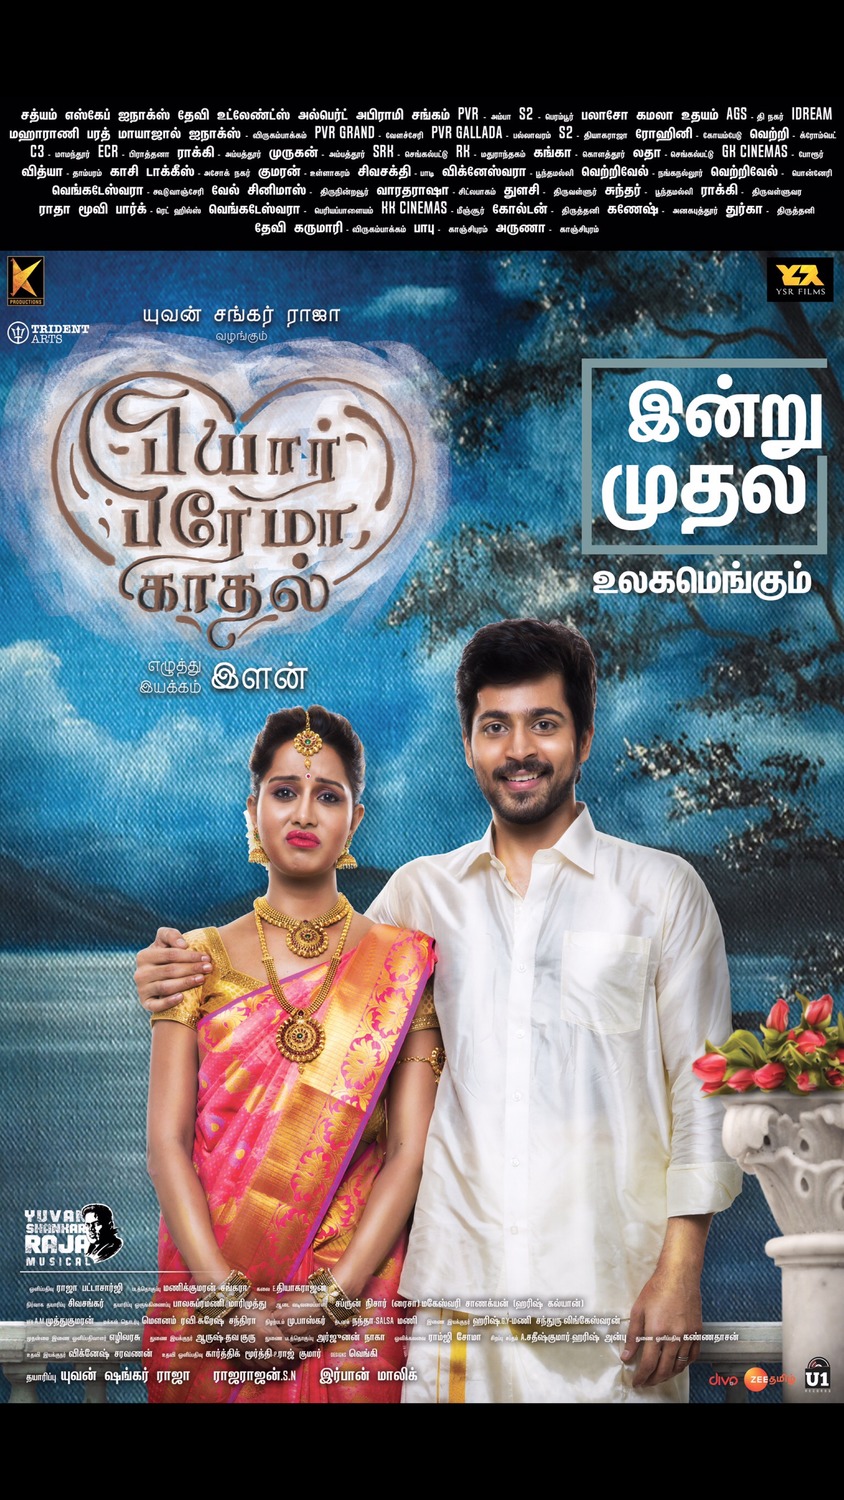 Extra Large Movie Poster Image for Pyaar Prema Kaadhal (#5 of 10)